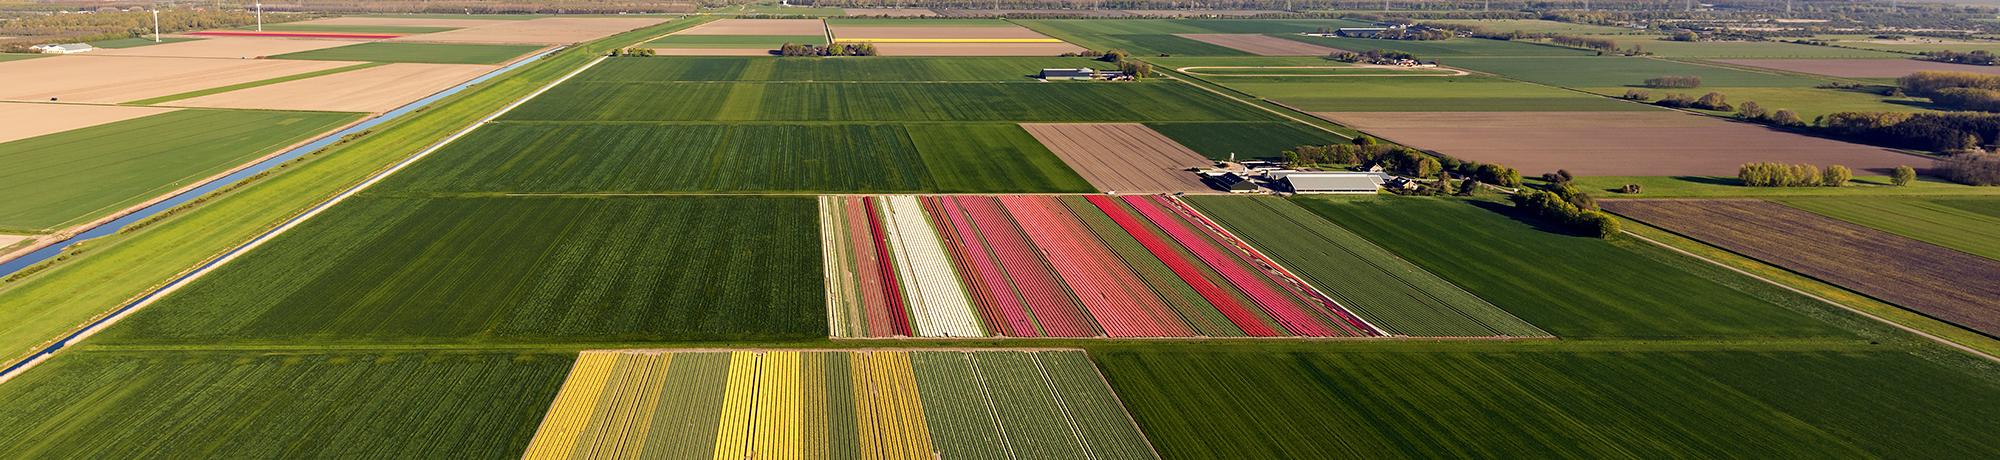 aerial view of field of crops